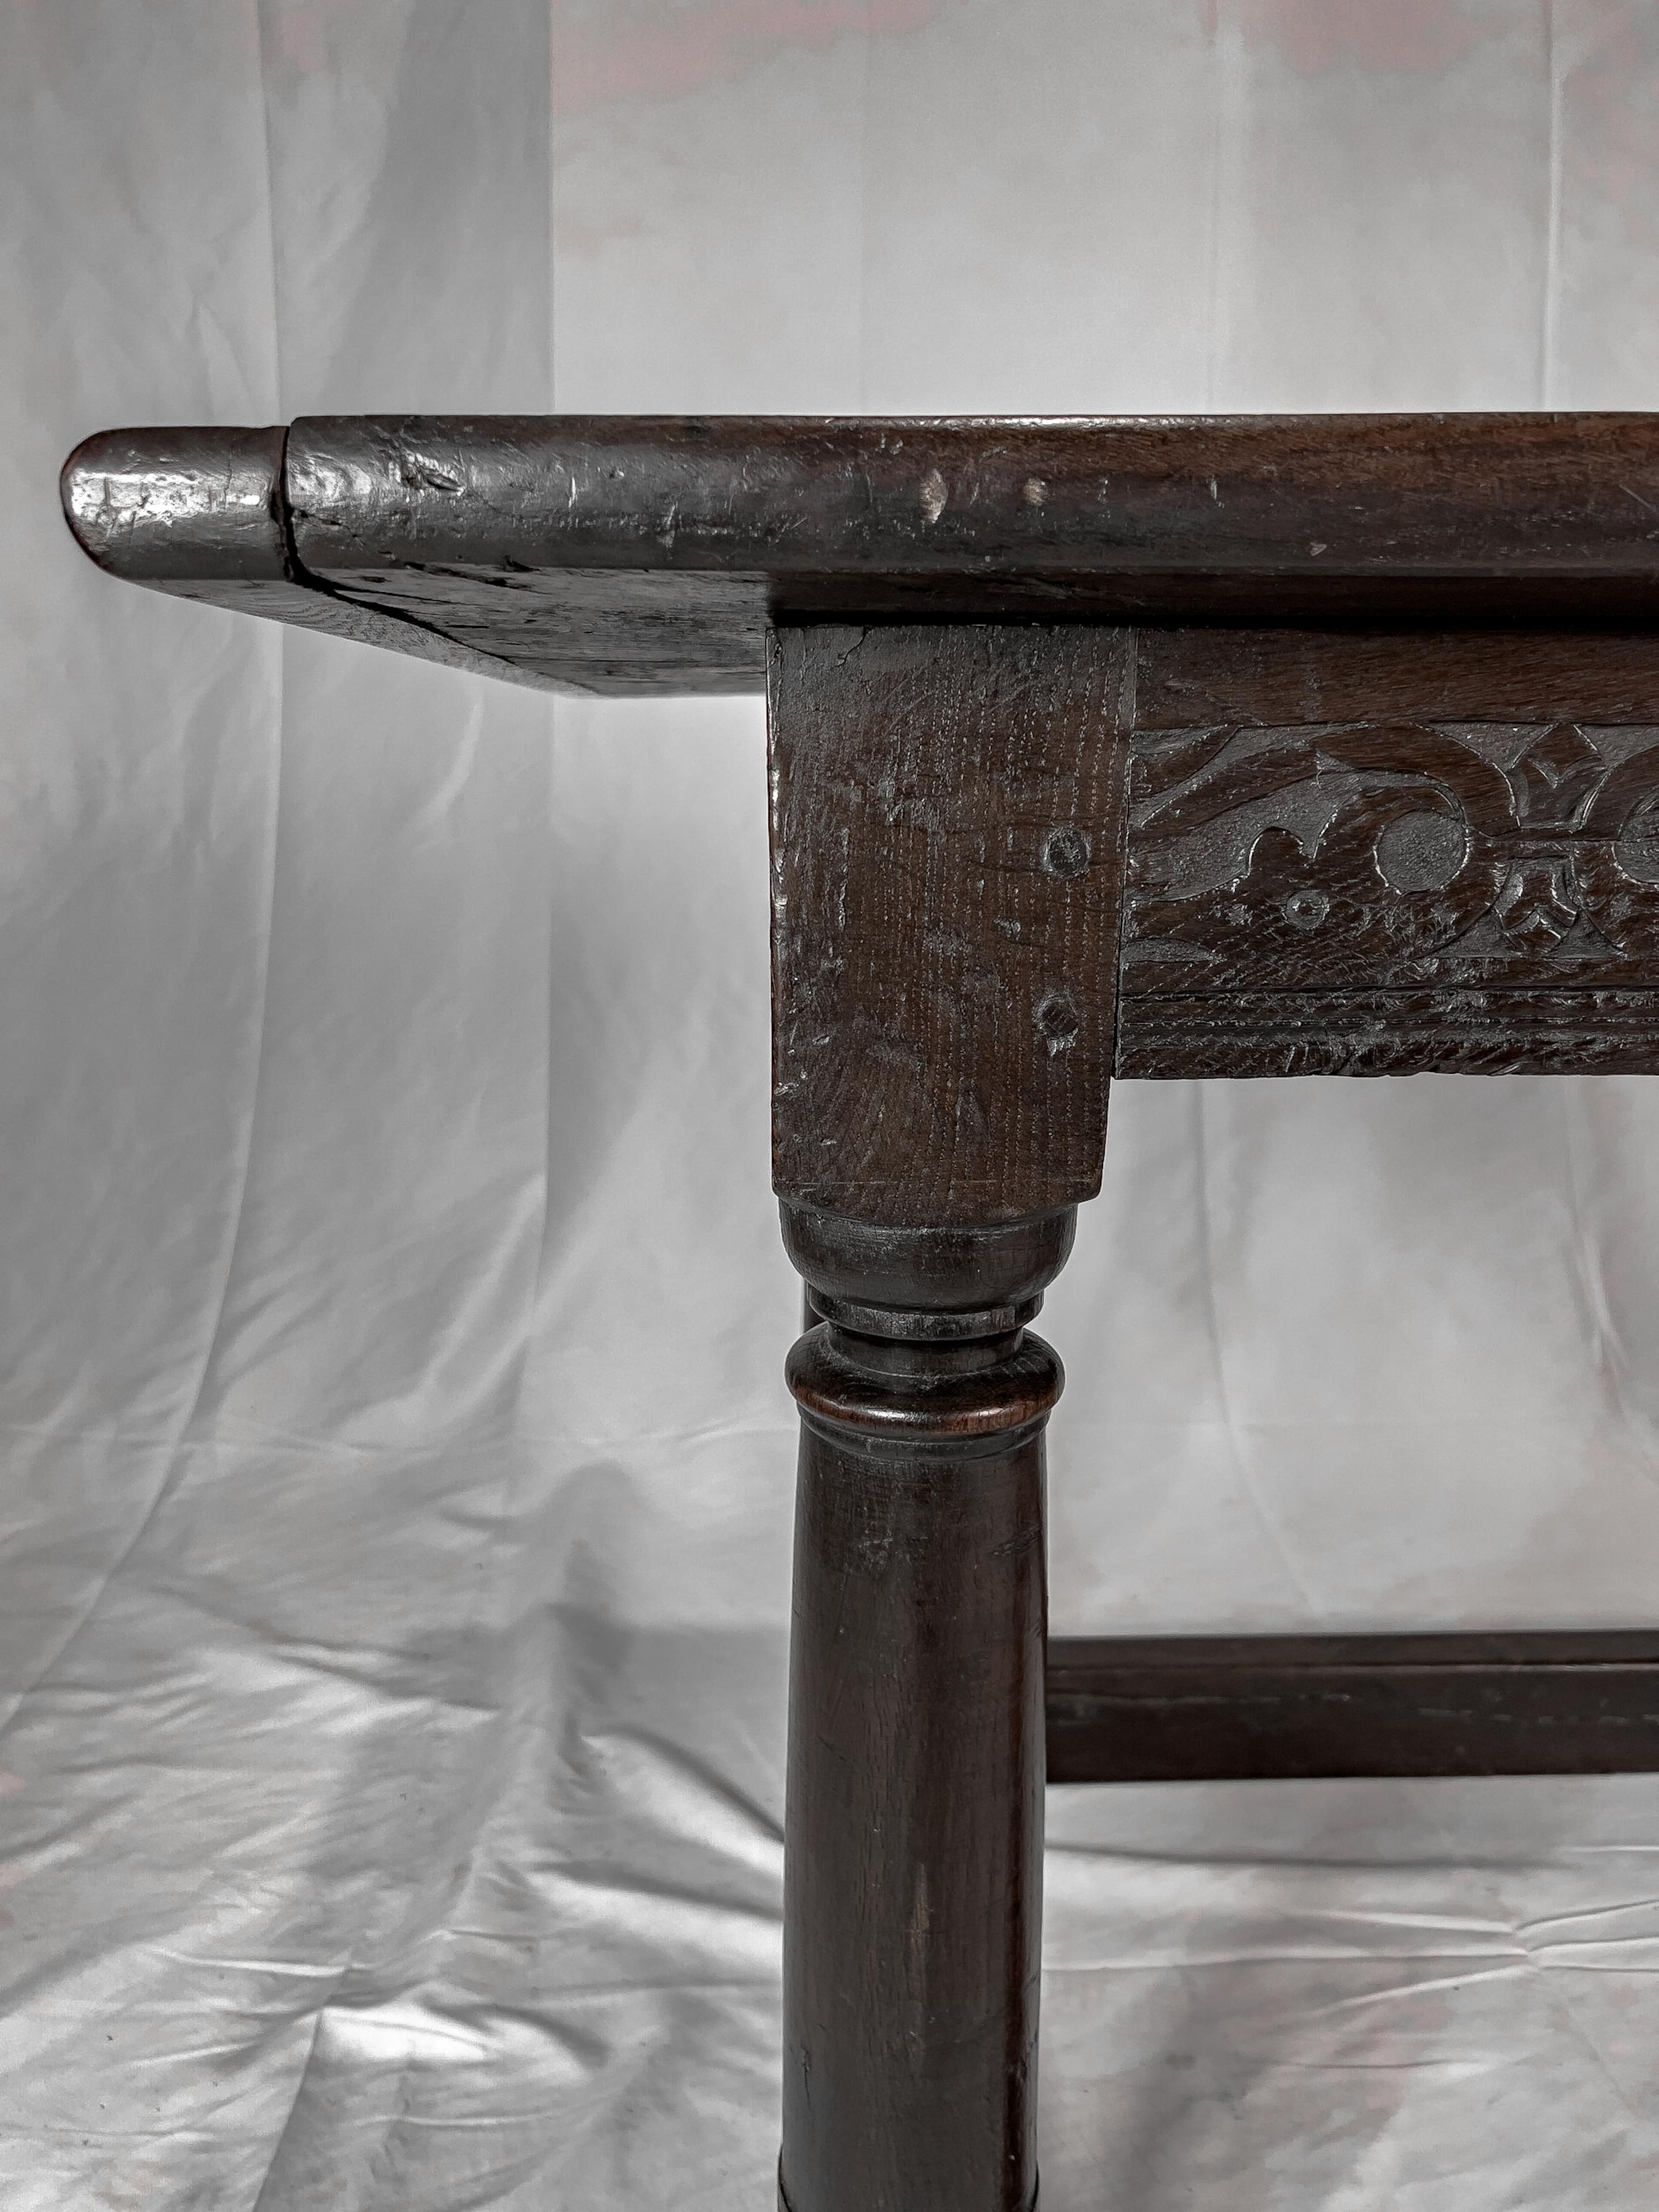 Circa 1810 English oak Jacobean style Table with a plank top, hand-carved detail along all 4 sides of the apron, and 4 heavy turned legs joined with a stretcher.